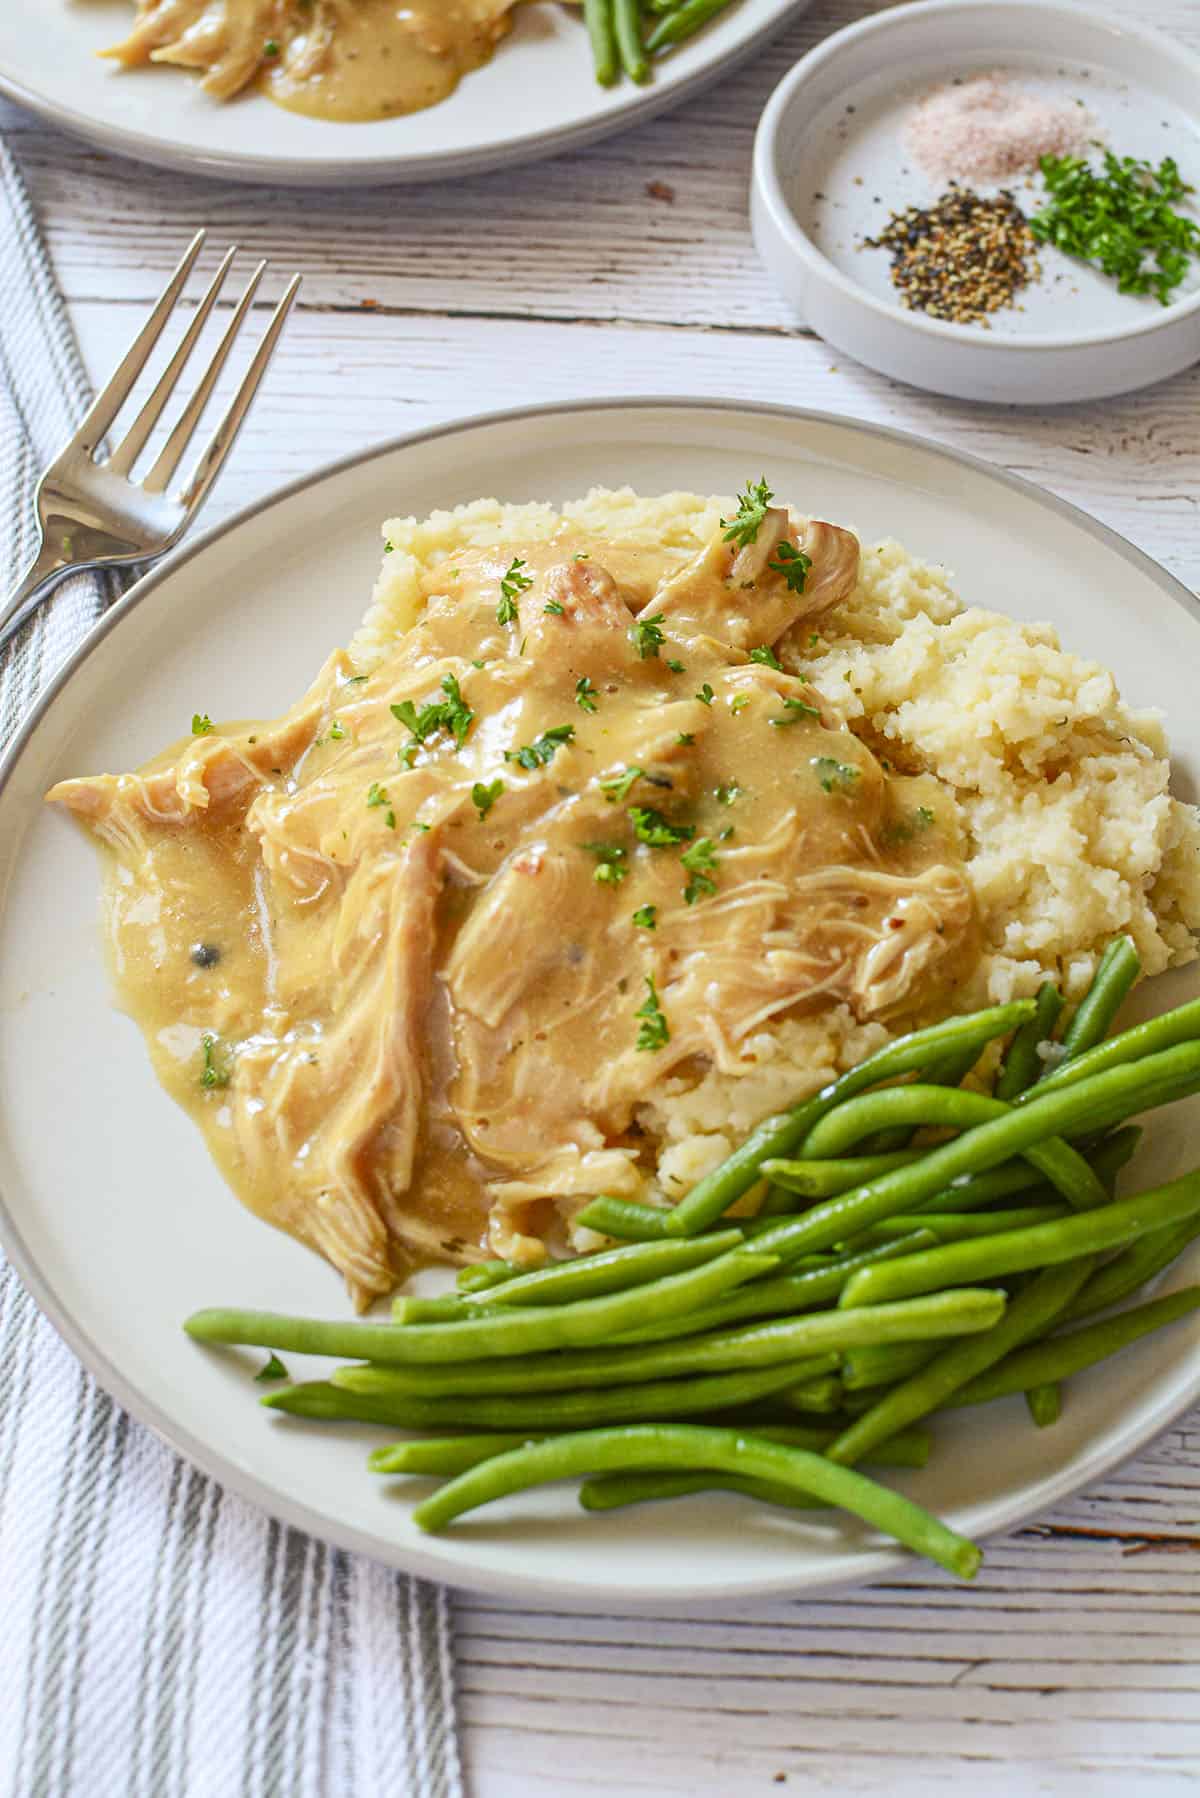 Chicken and gravy on a plate with green beans on the side.